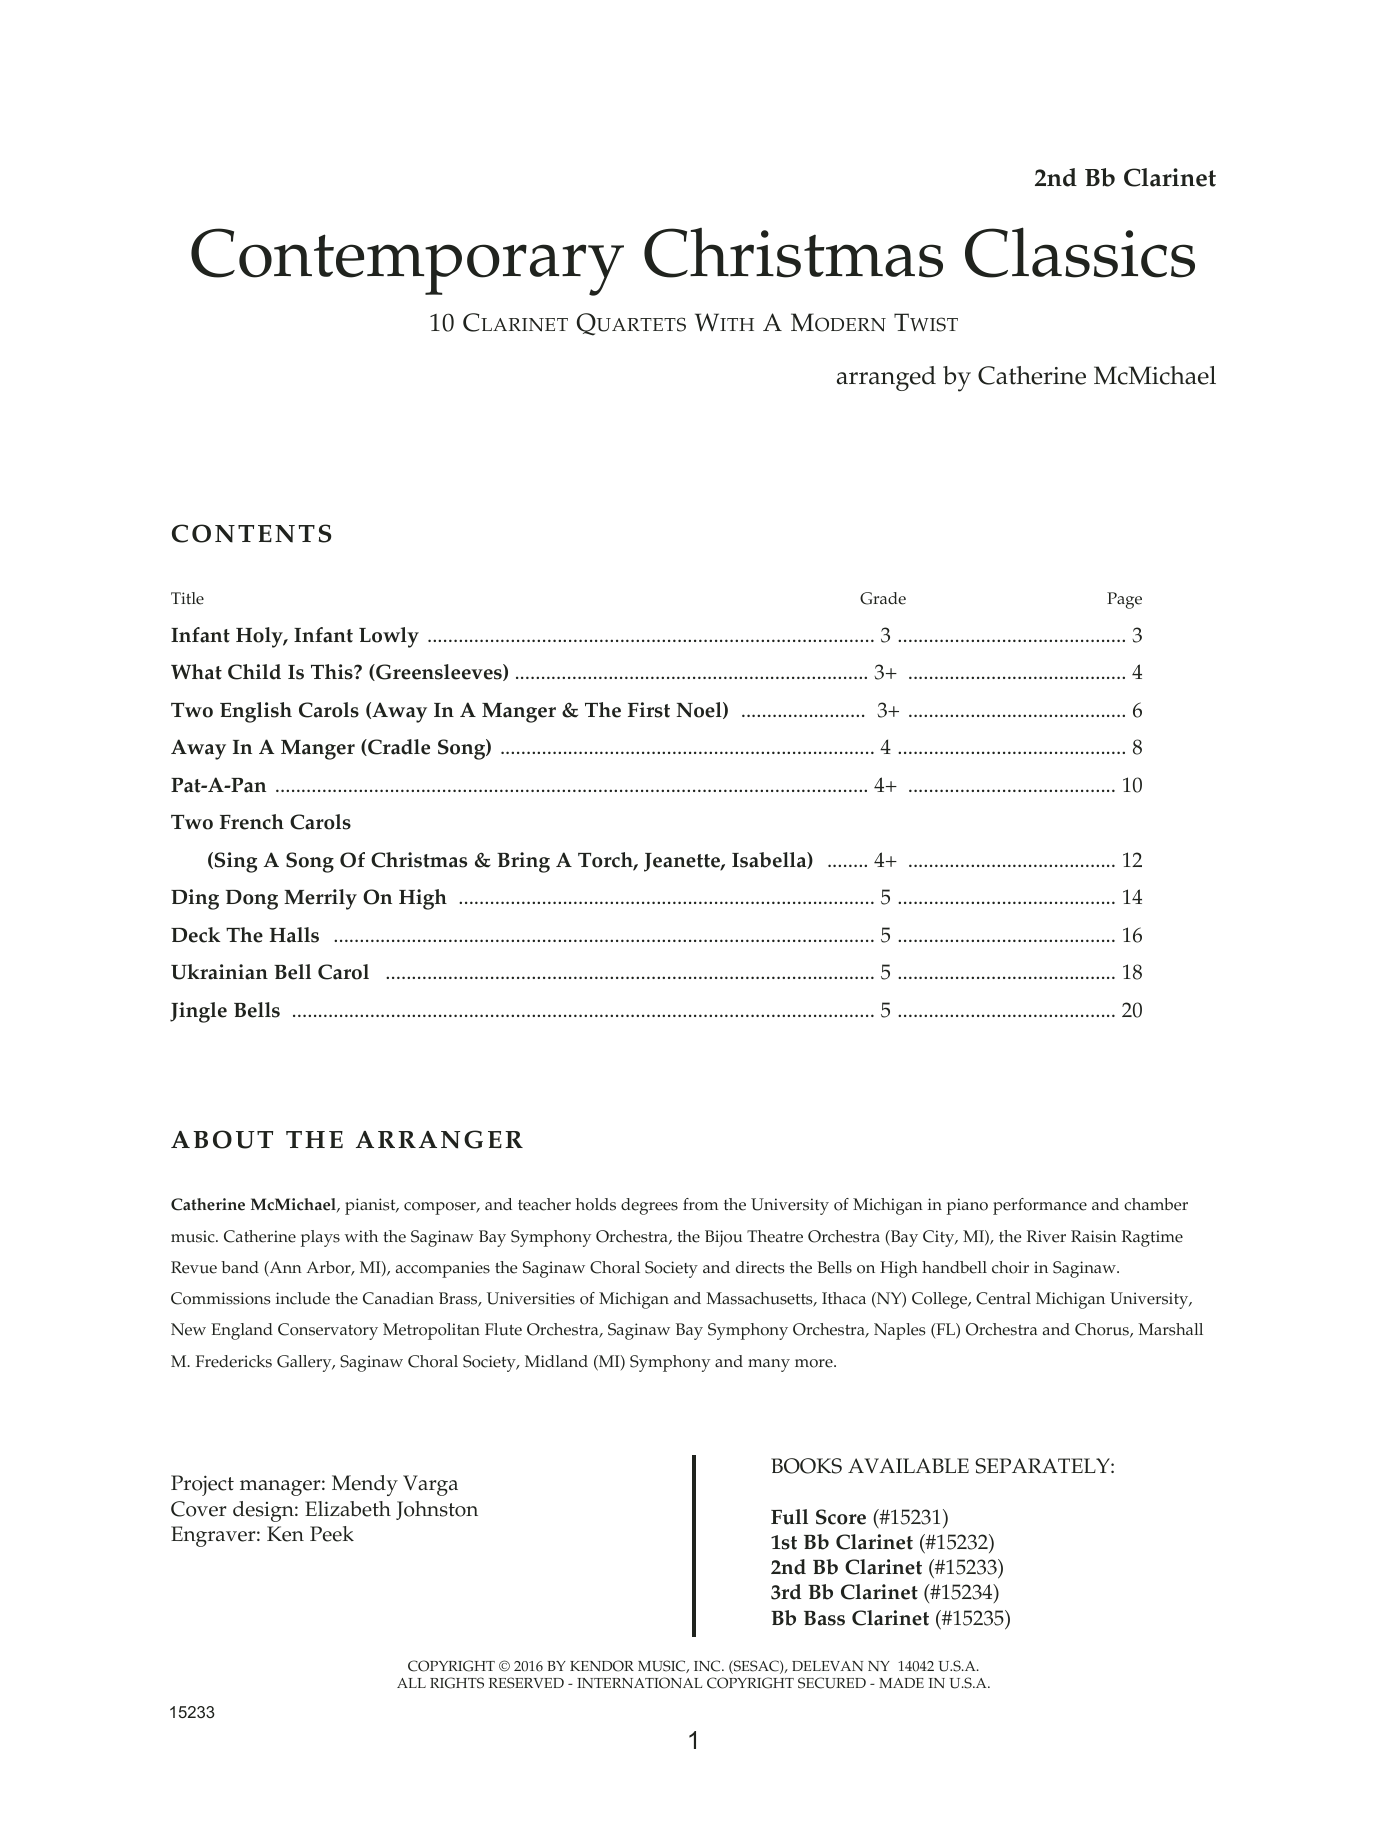 Download Catherine McMichael Contemporary Christmas Classics - 2nd B Sheet Music